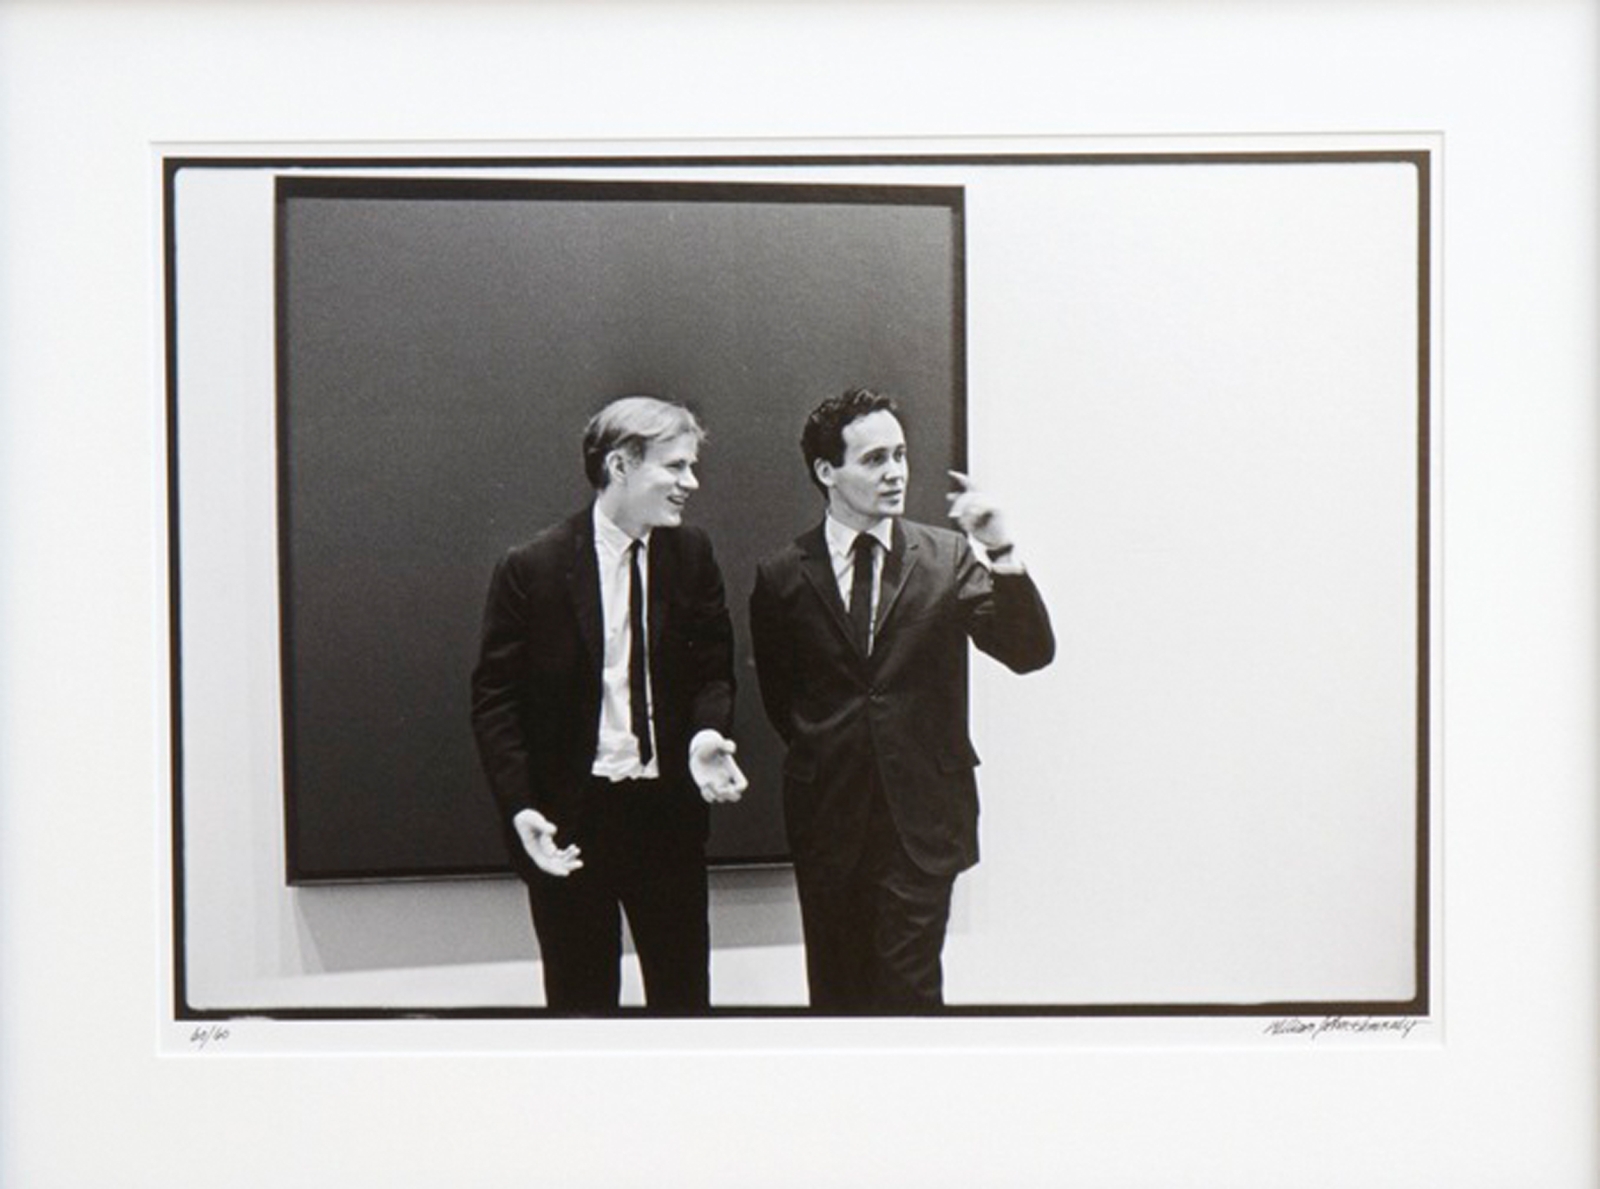 Andy Warhol and Indiana in front of an unidentified canvas by Ad Reinhardt at the opening of the exhibition Americans 1963 at the Museum of Modern Art, New York, May 21, 1963. Photo: &copy;William John Kennedy. Image courtesy of William John Kennedy/Kiwiartsgroup.com